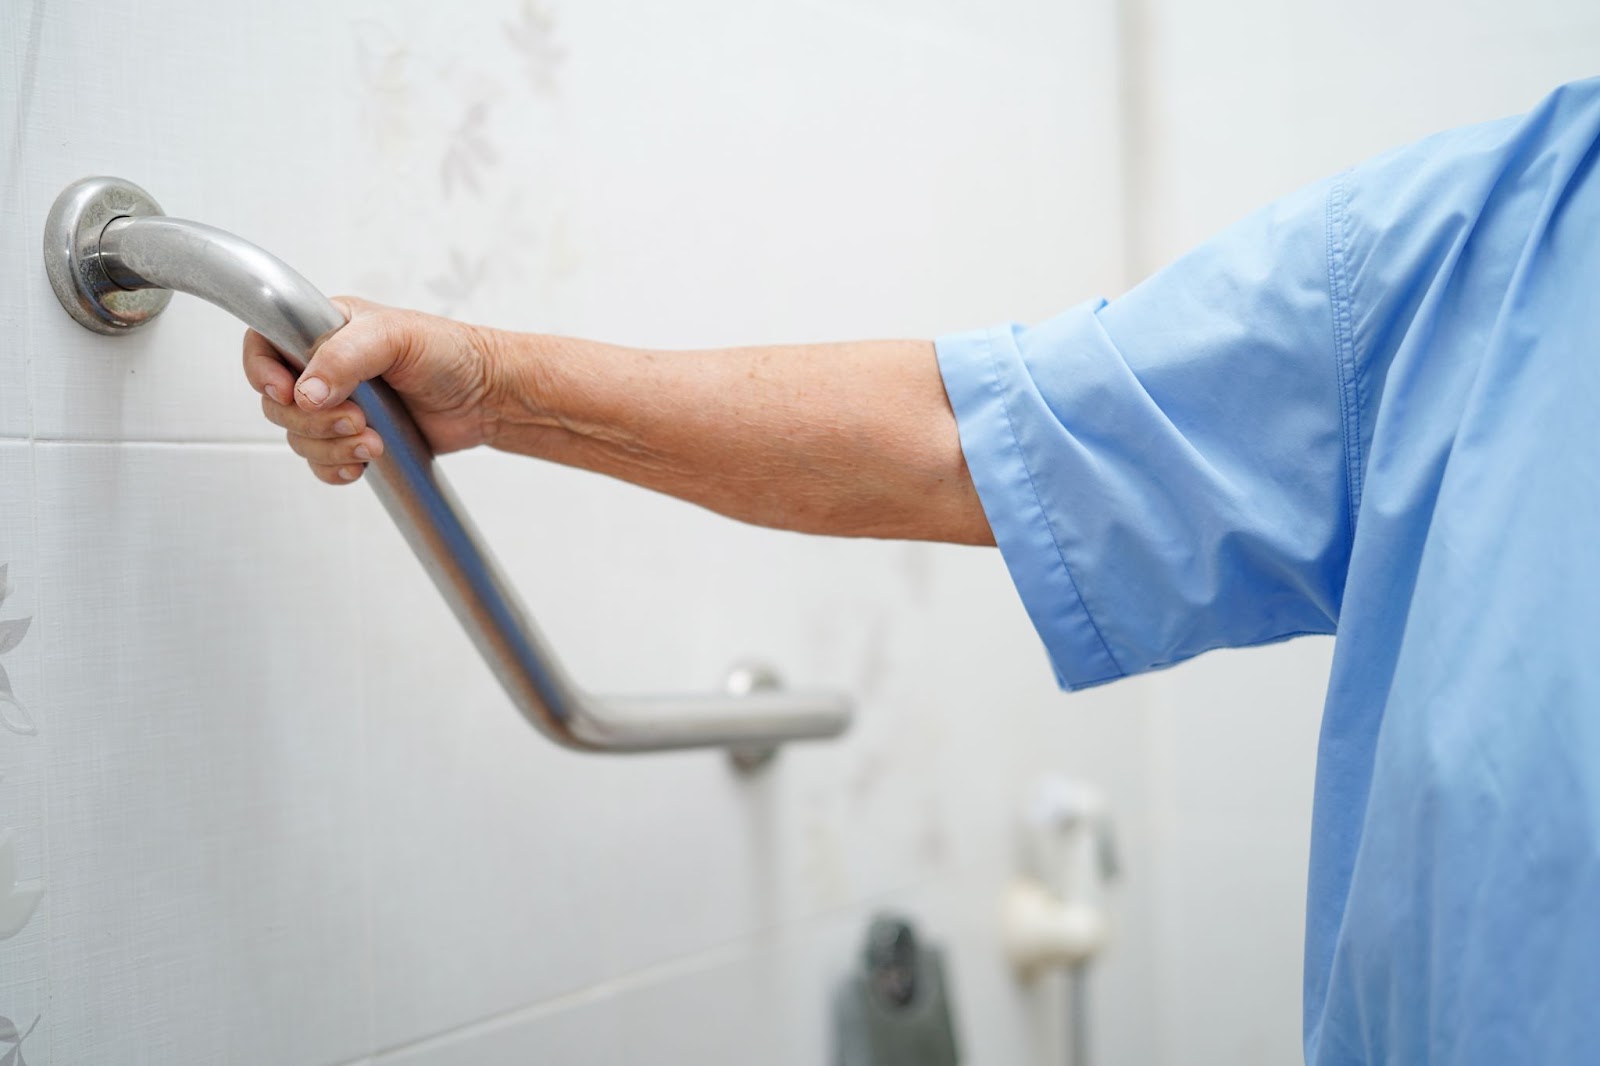 An elderly person holds a grab bar in the bathroom for support.